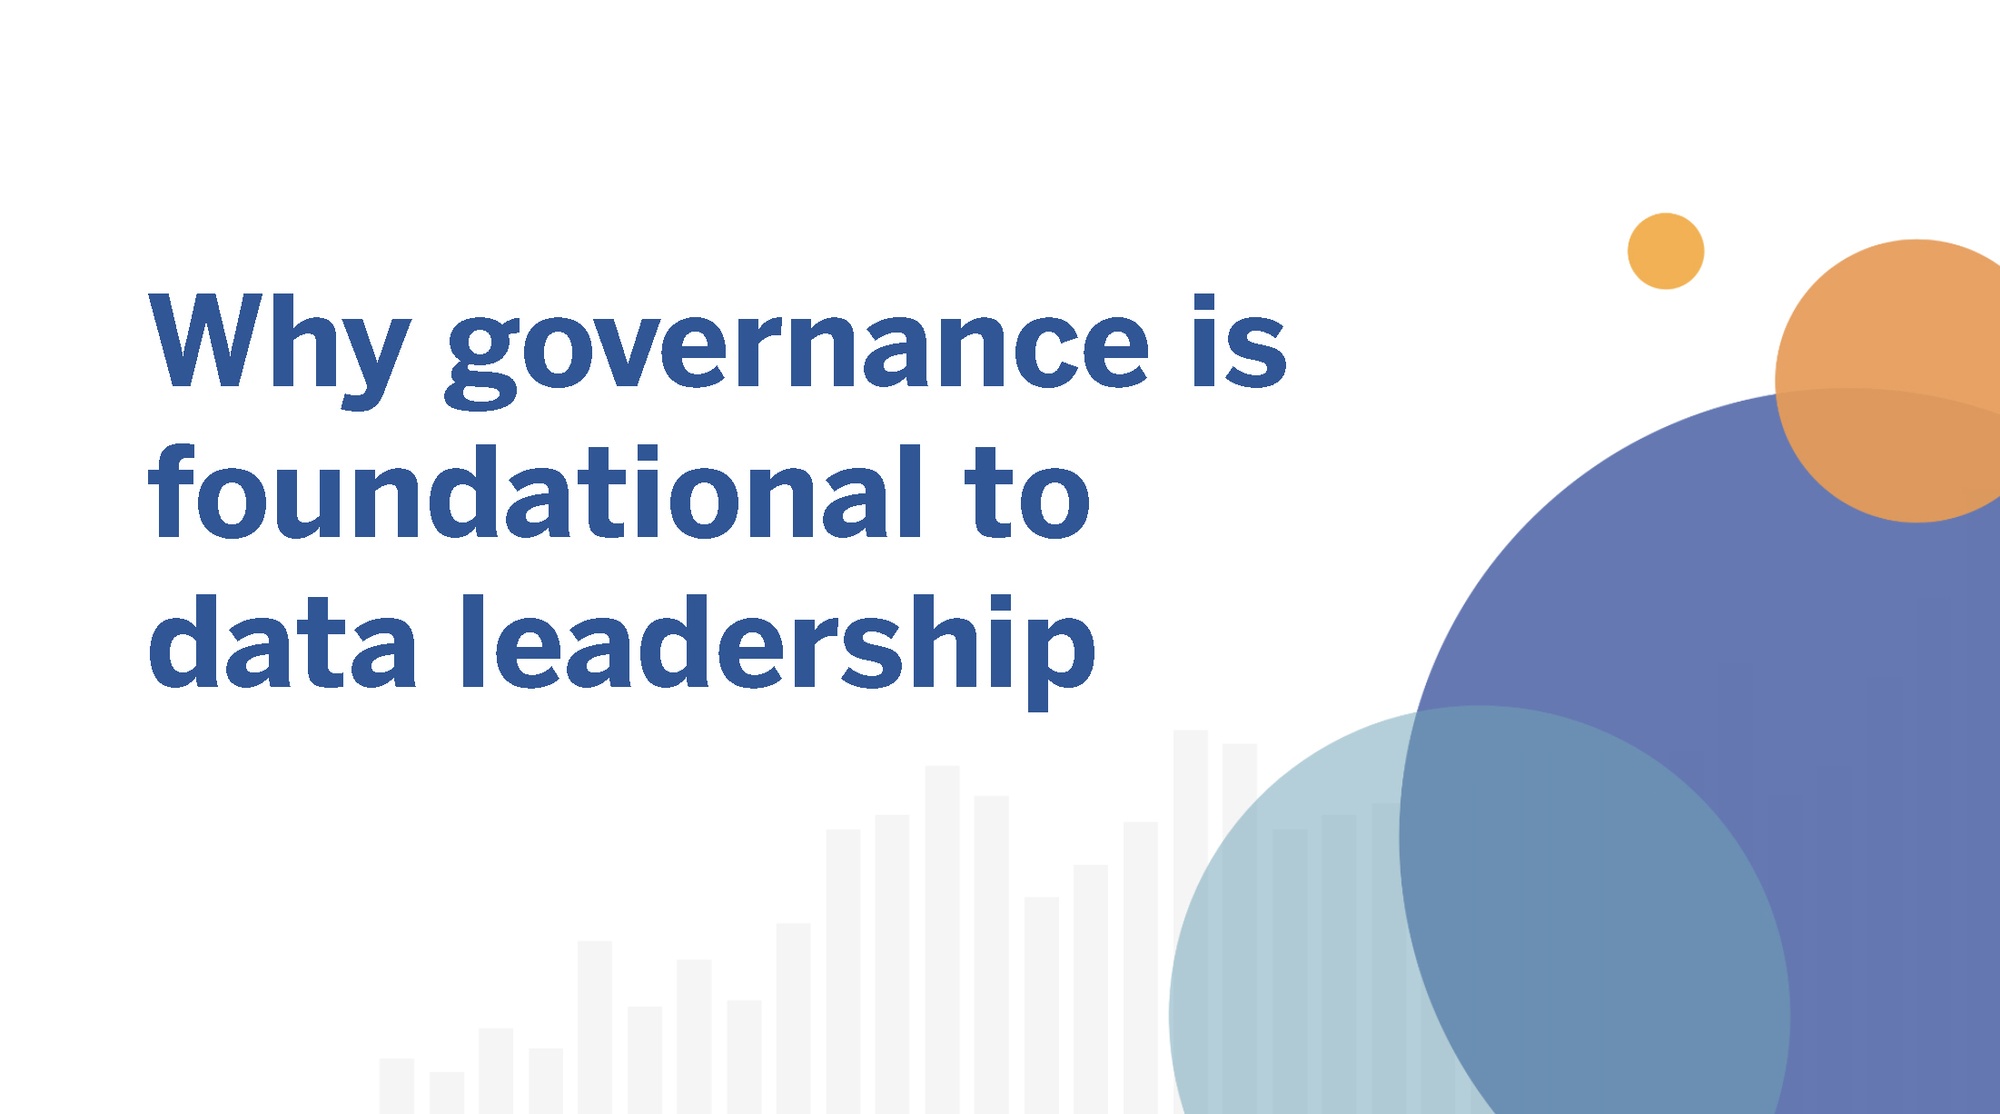 Tableau on why governance is foundational to data leadership